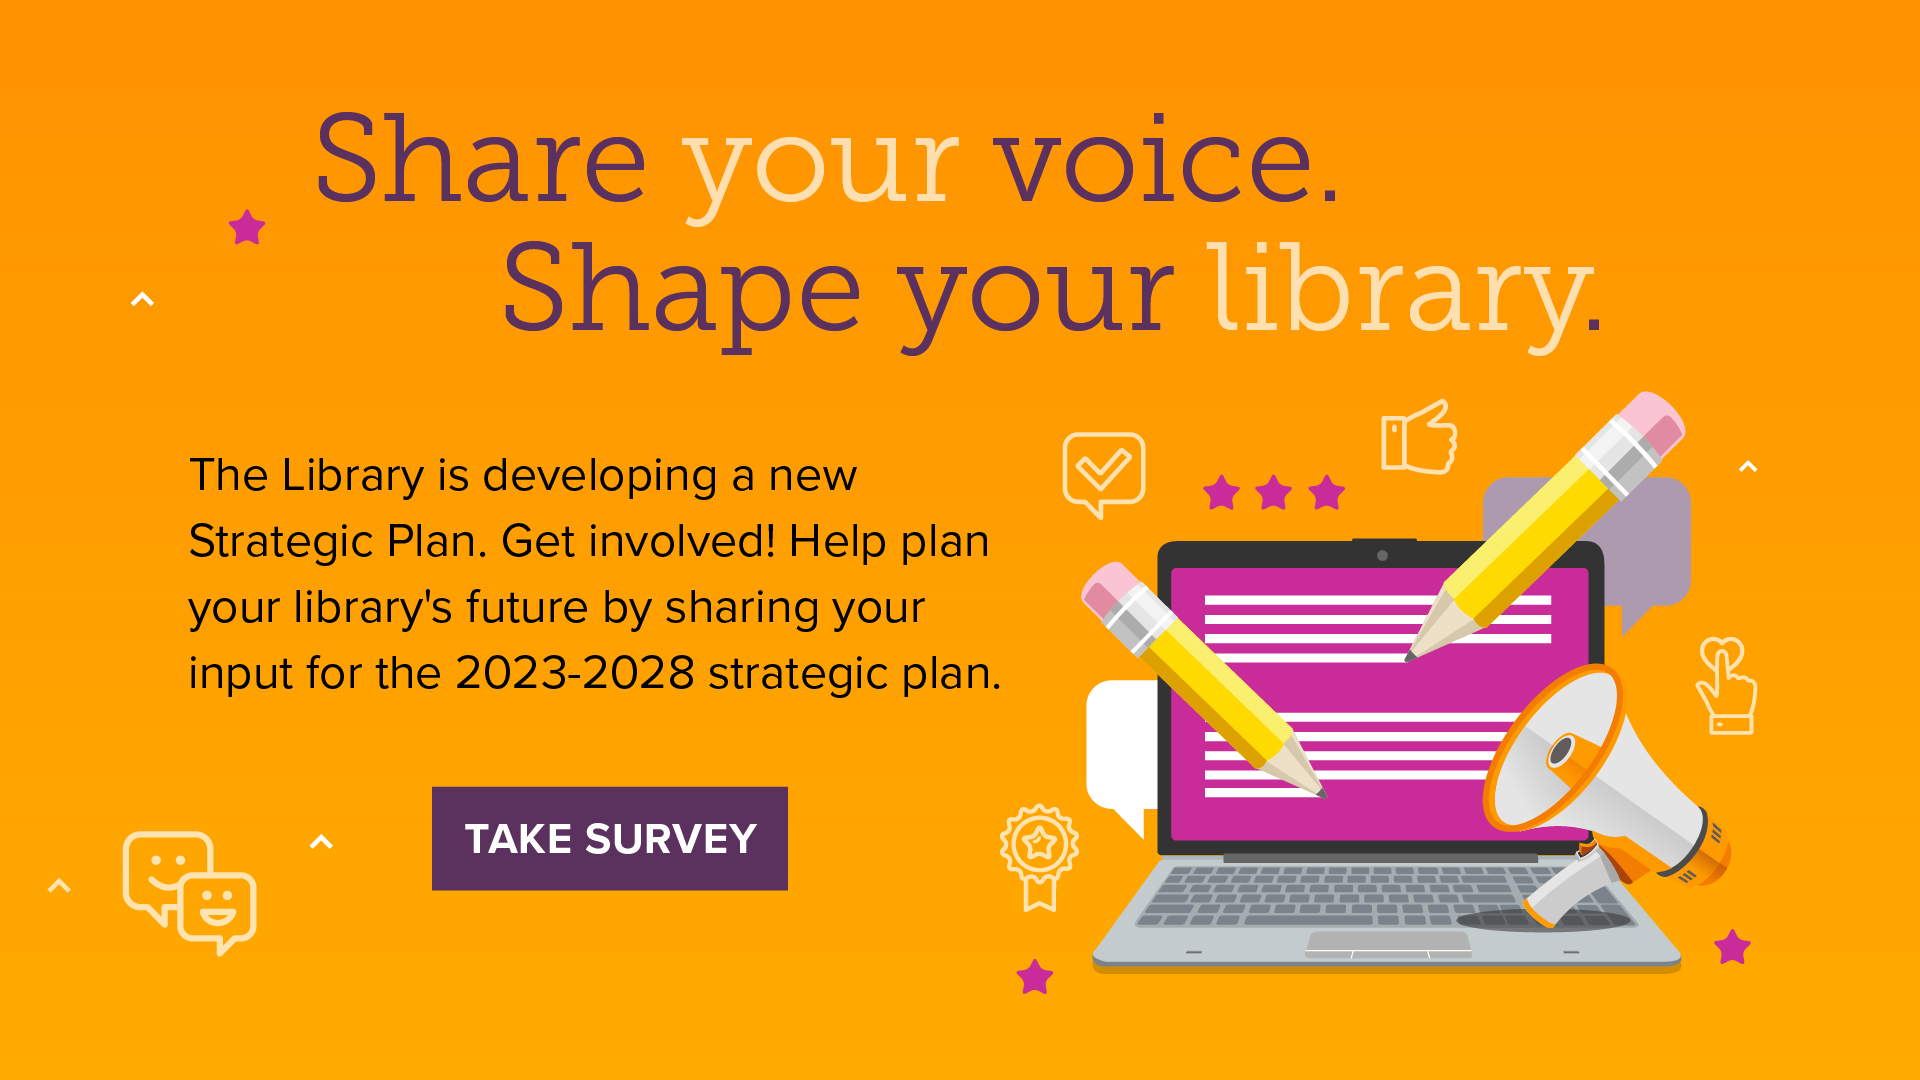 Take a survey to help the library